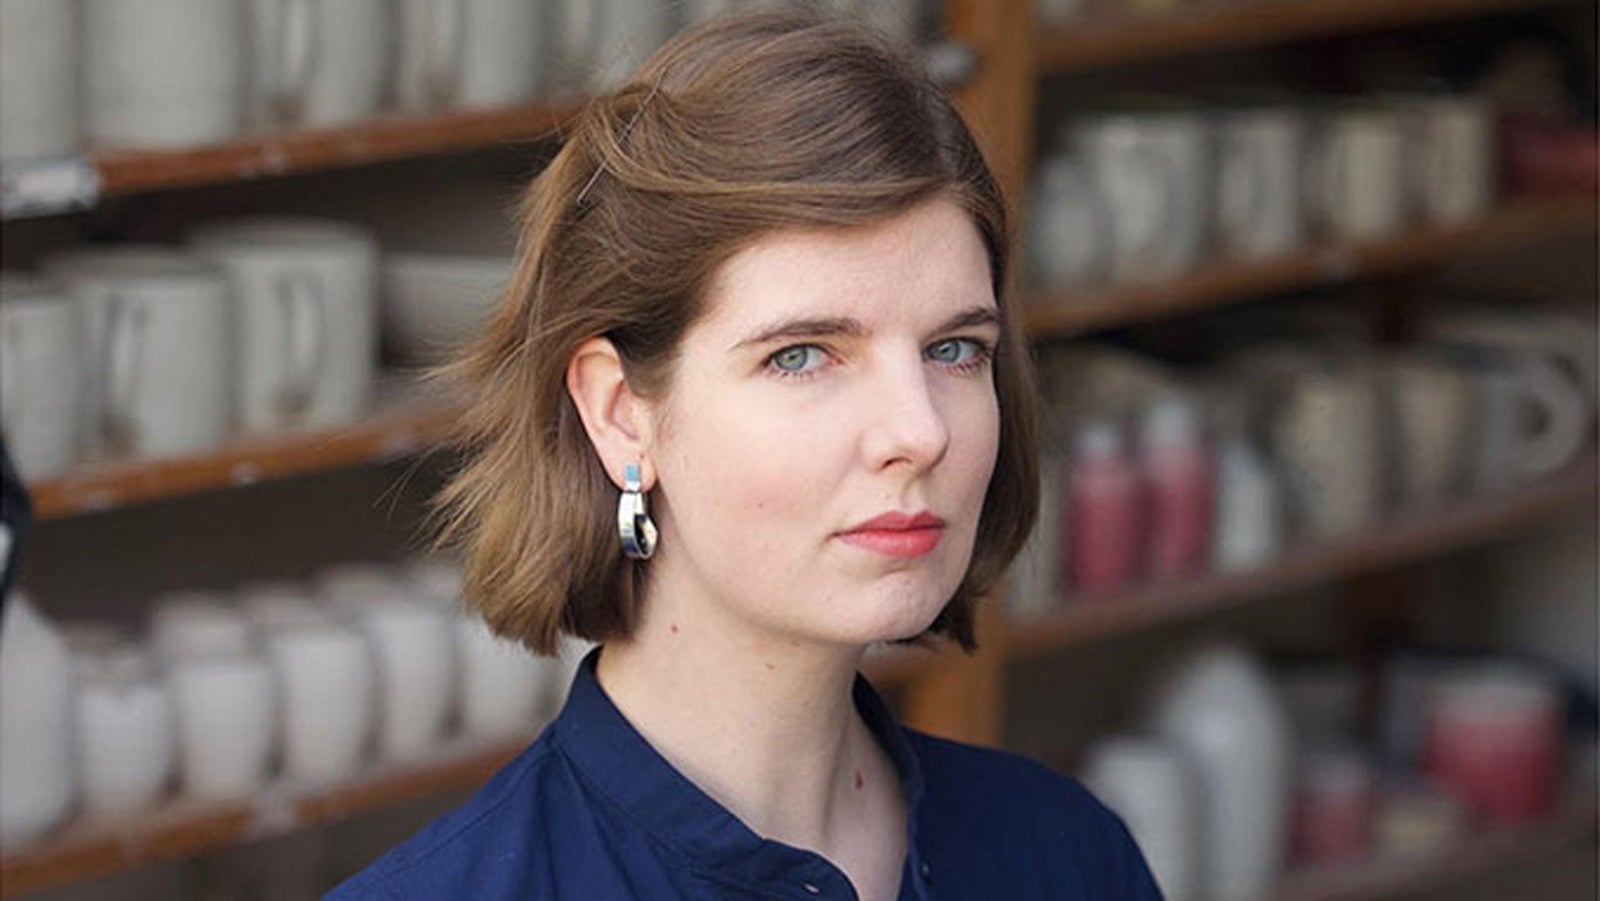 Elizabeth Macneal wears a blue shirt and looks to camera, standing in front of shelves full of ceramics